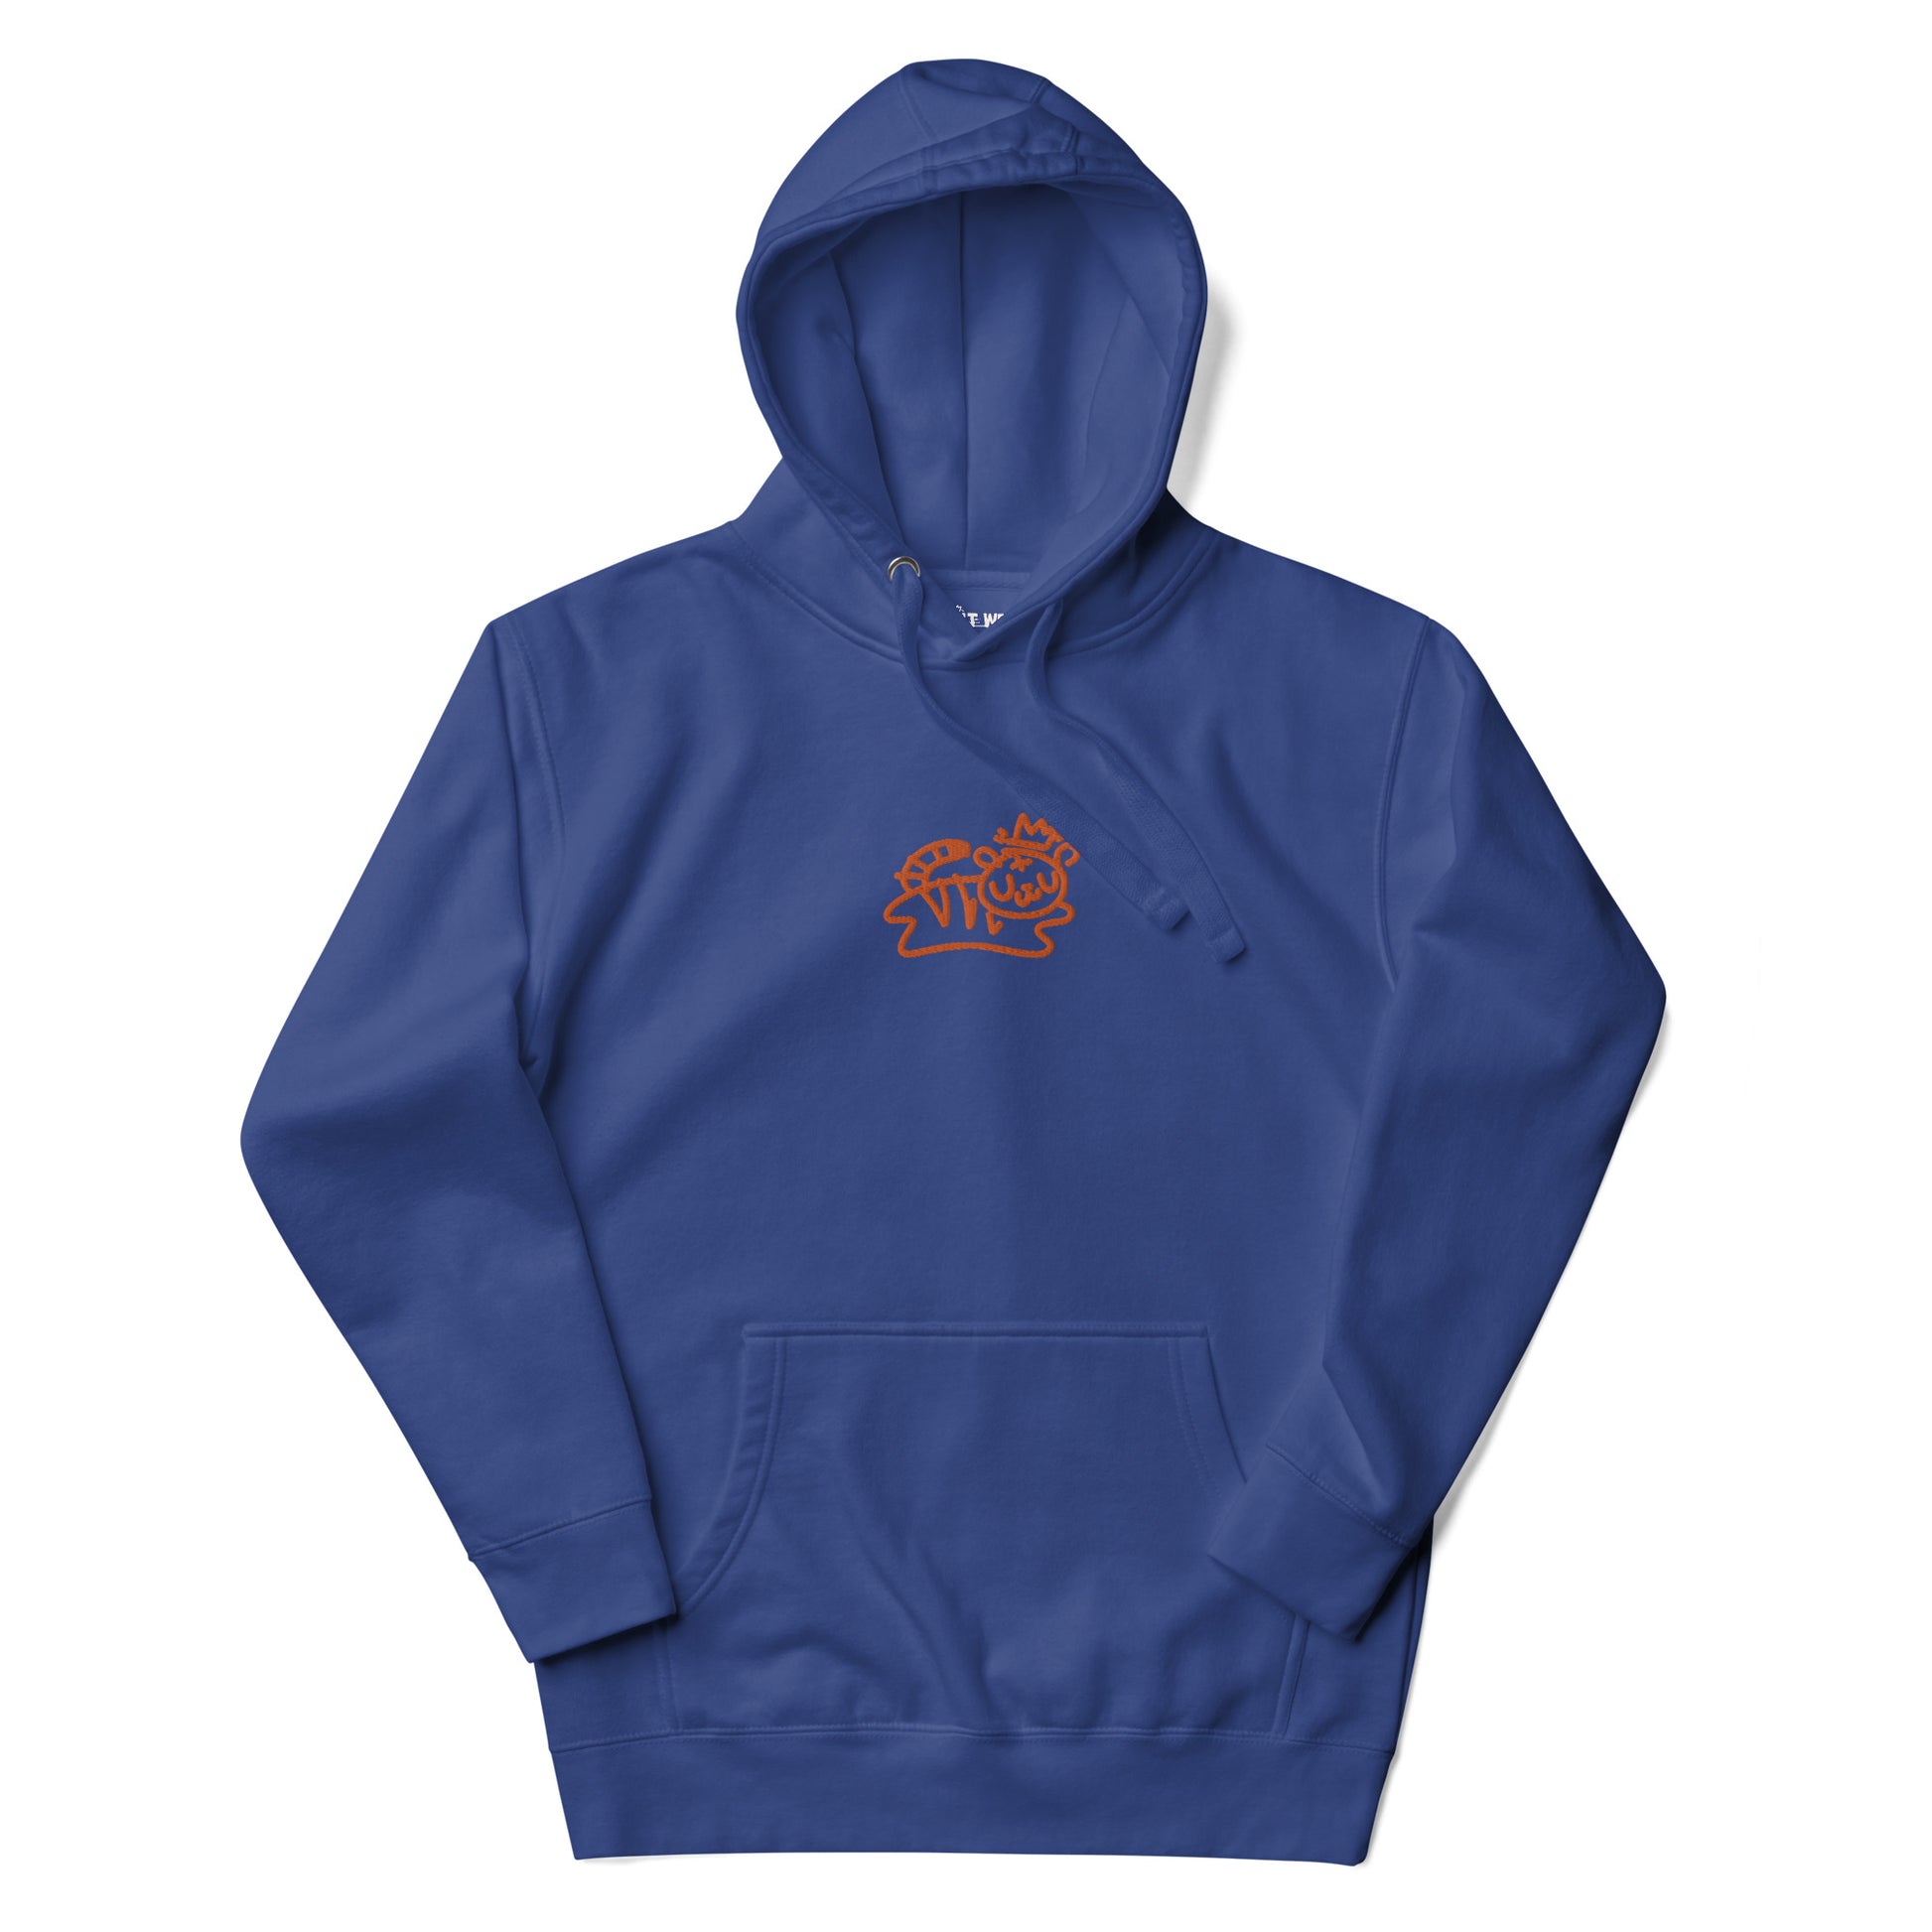 royal blue pullover hoodie with embroidered bolt-wear tiger logo on chest 